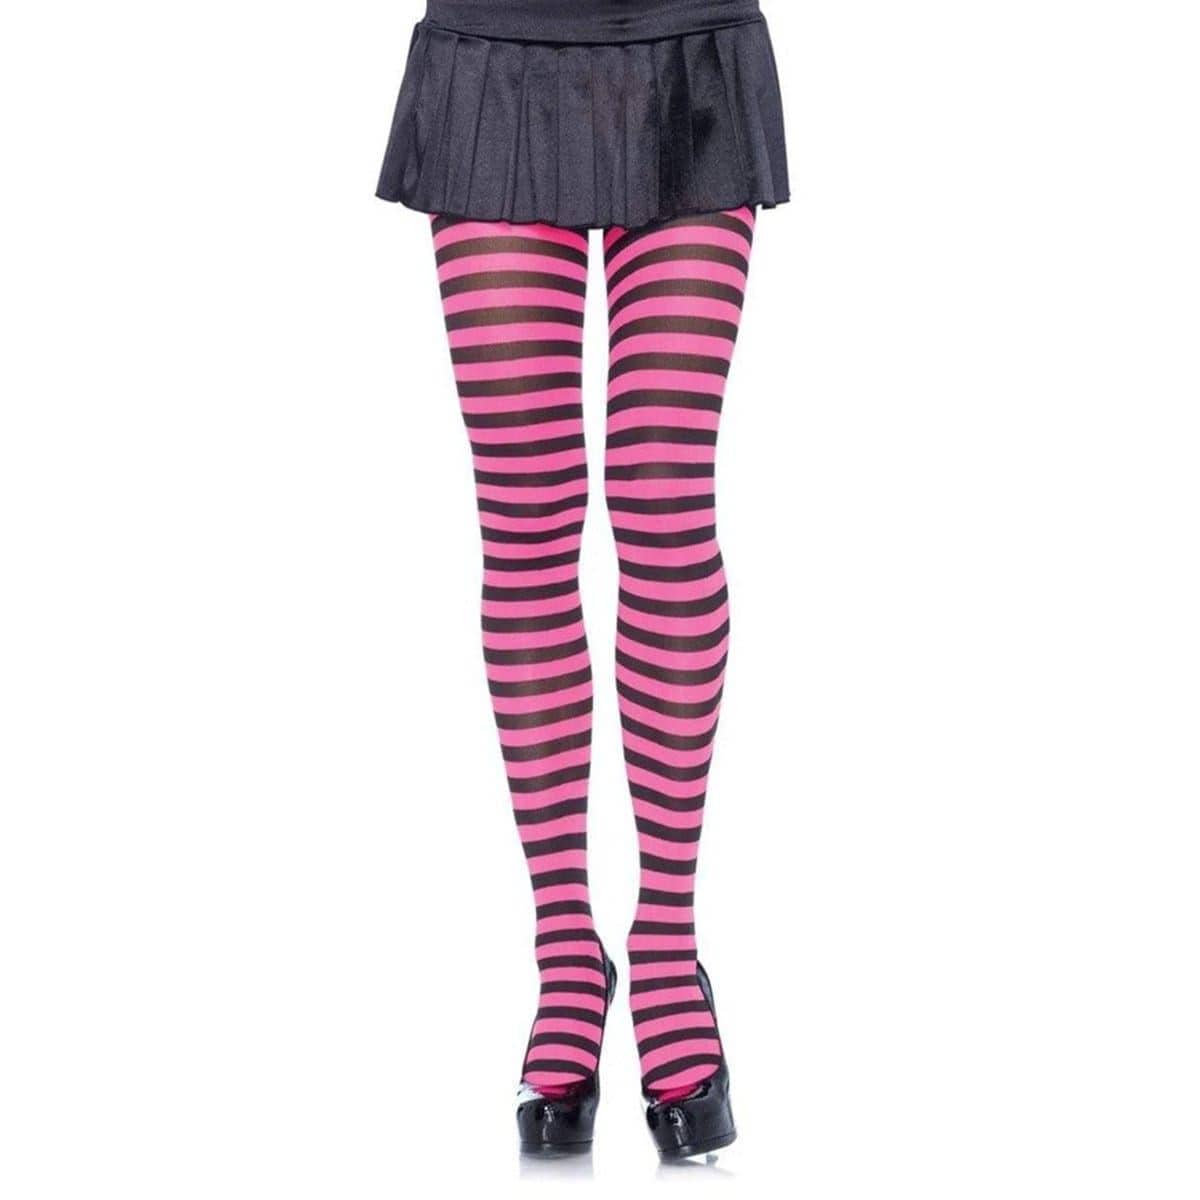 Buy Costume Accessories Black & pink striped nylon tights for women sold at Party Expert